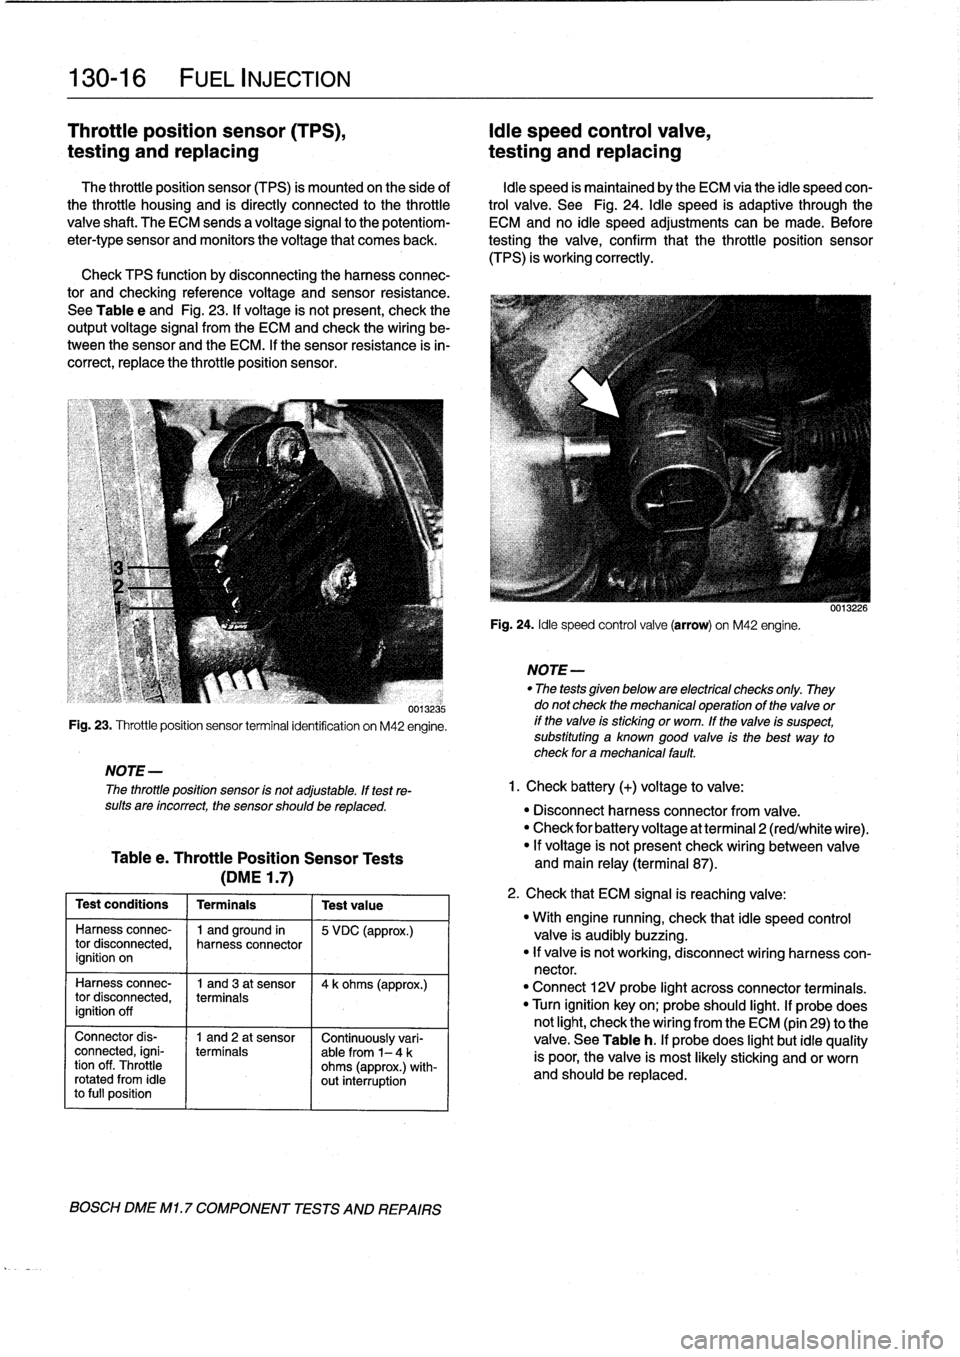 BMW 328i 1997 E36 User Guide 
130-
1
6

	

FUEL
INJECTION

Throttie
position
sensor
(TPS),

	

Idie
speed
control
valve,
testing
and
replacing

	

testing
and
replacing

The
throttie
position
sensor
(TPS)
is
mounted
on
the
side
o